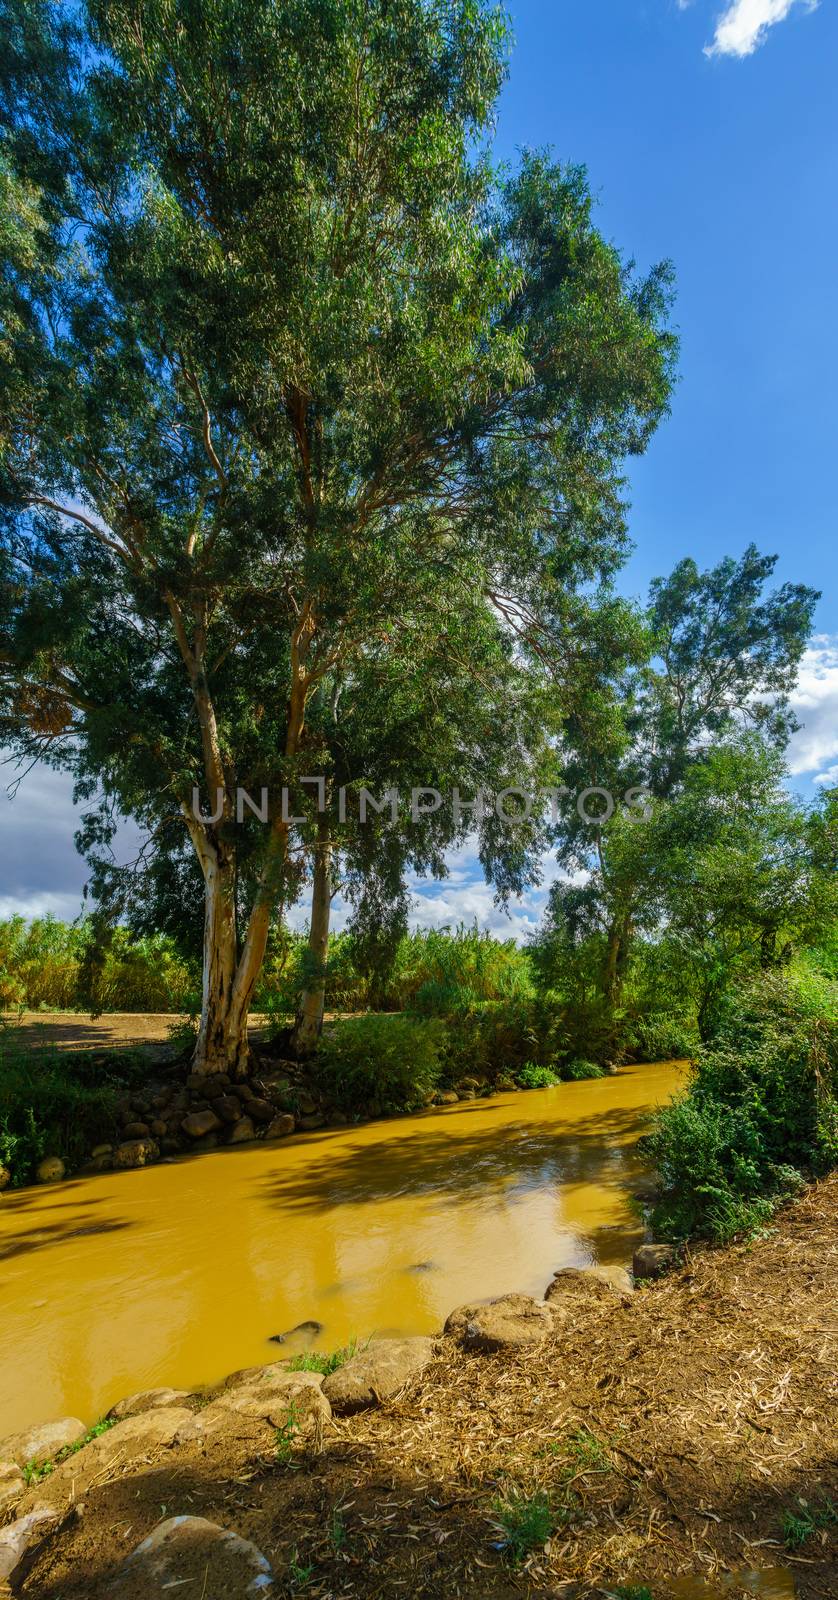 View of the Jordan River with Eucalyptus trees and other plants. Northern Israel